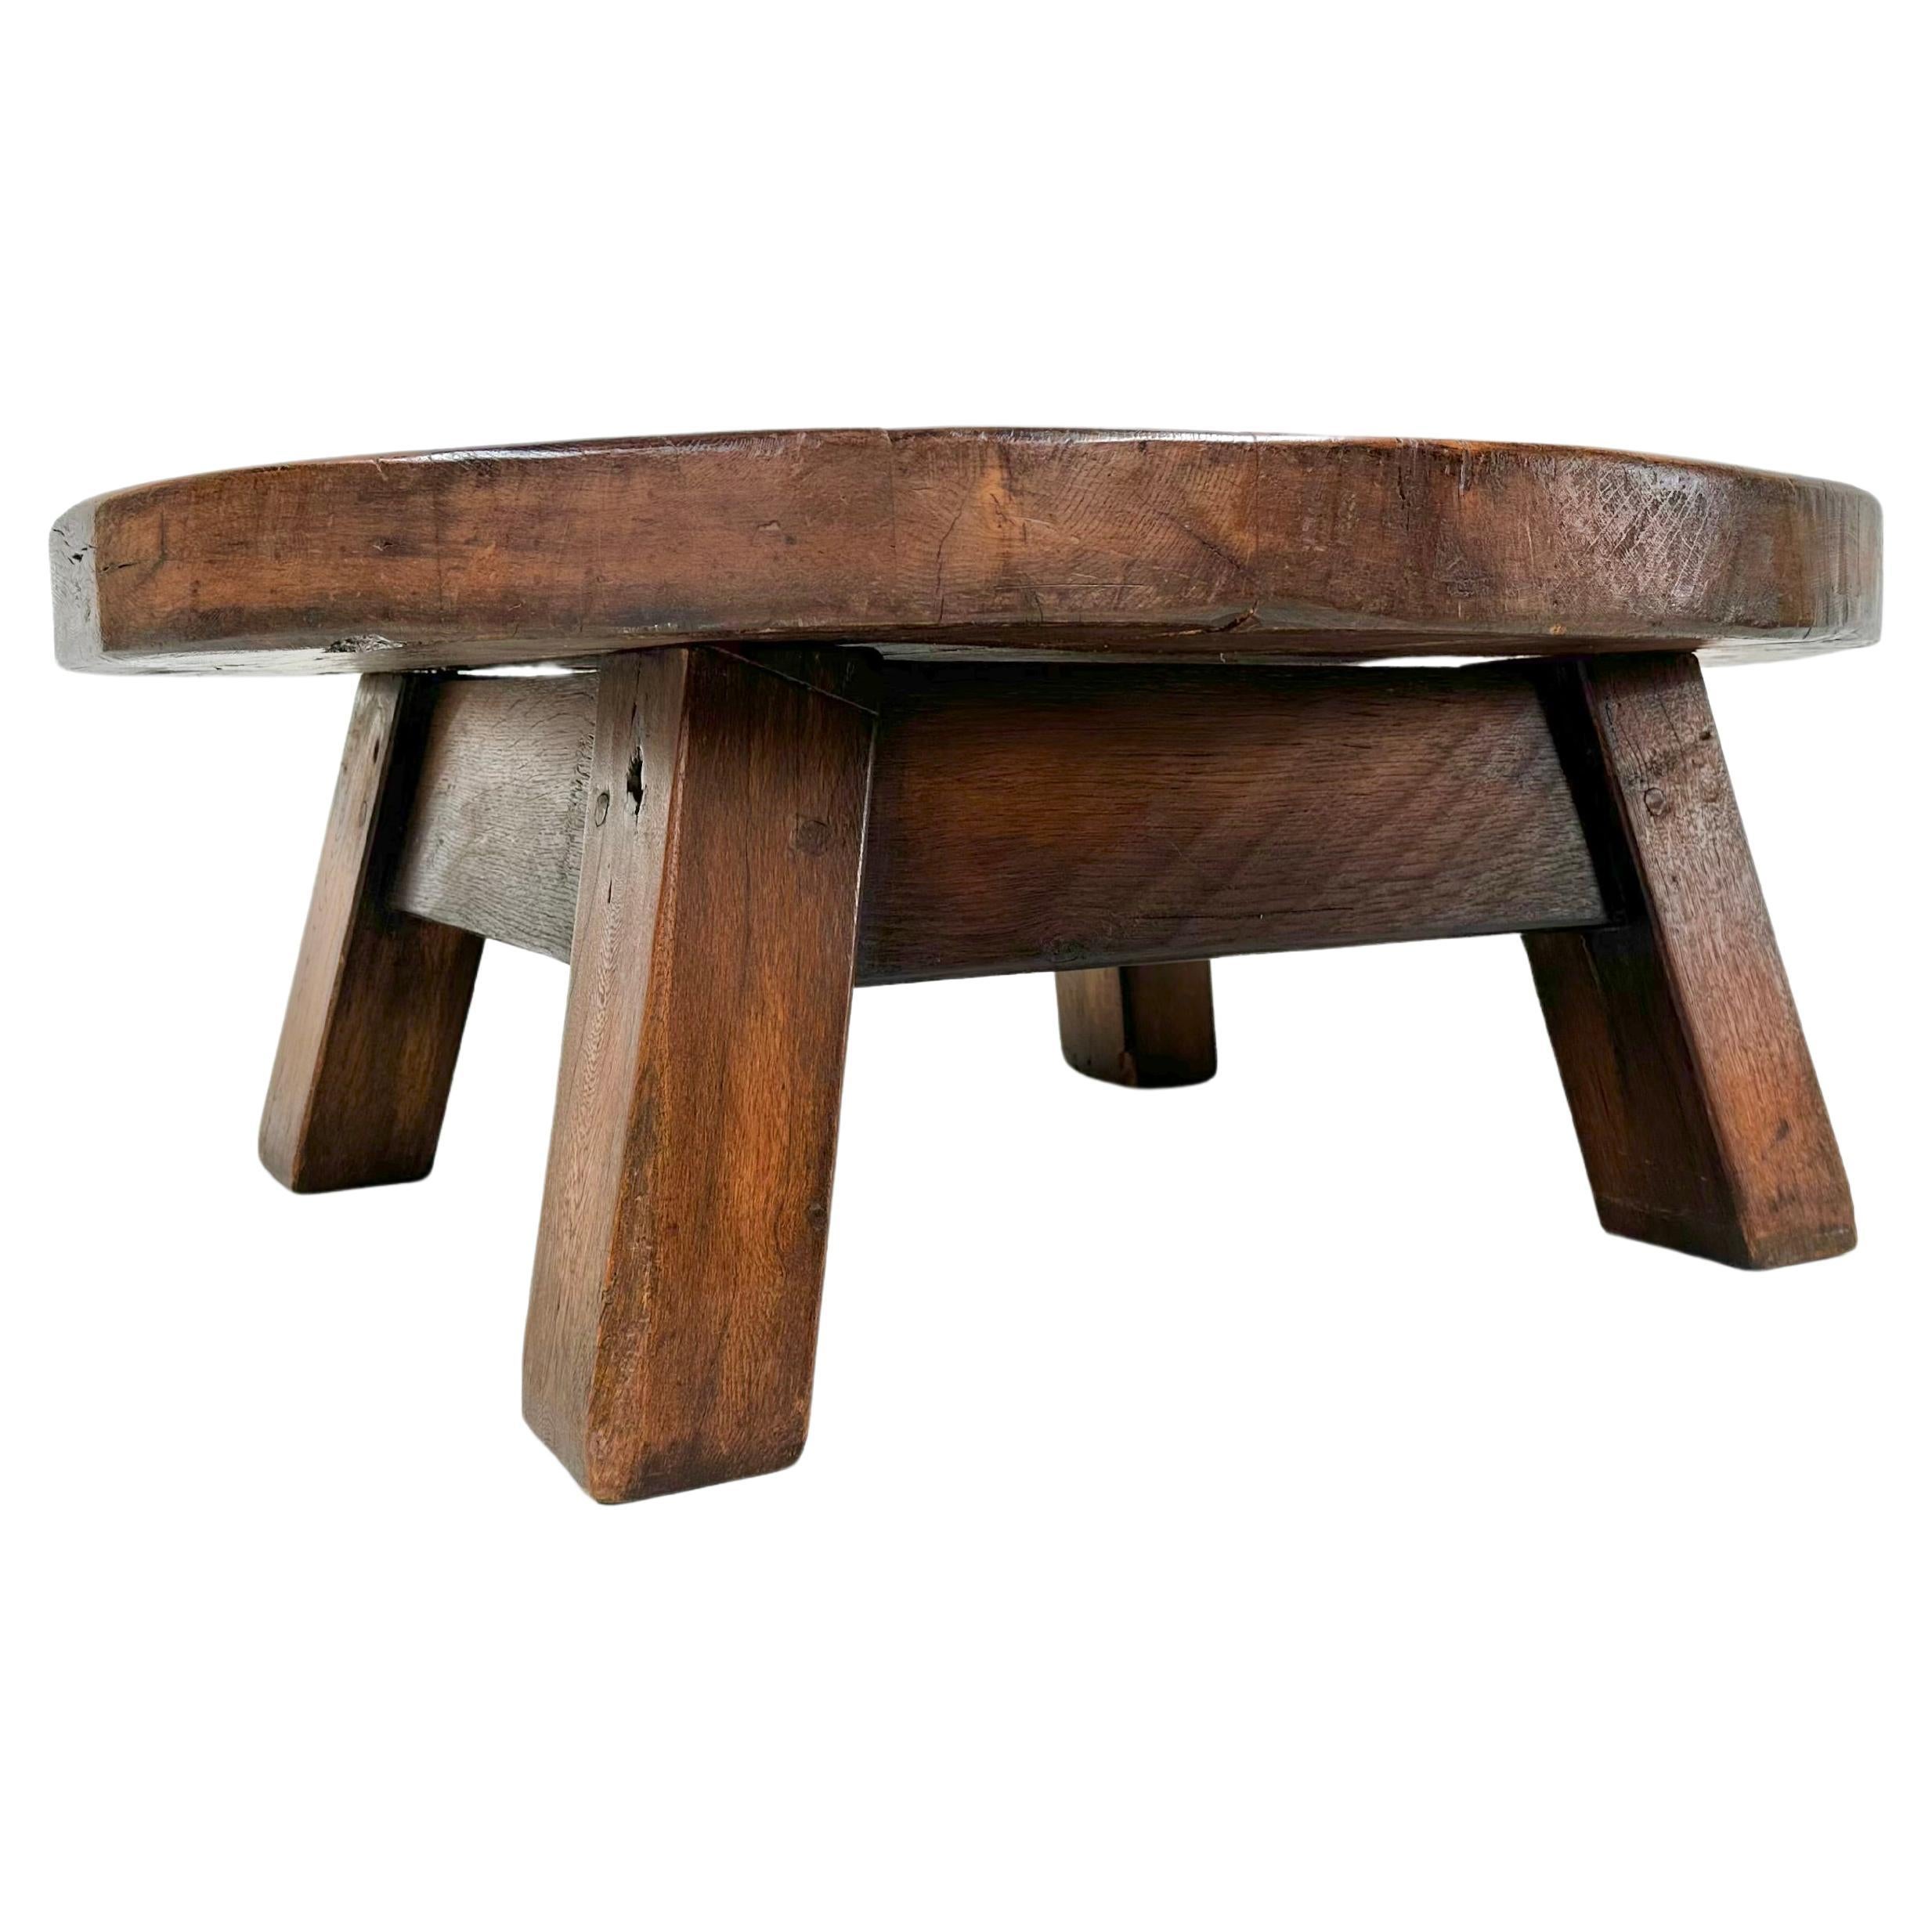 French Antique Oak Brutalist Round Coffee Table, 1920s. For Sale